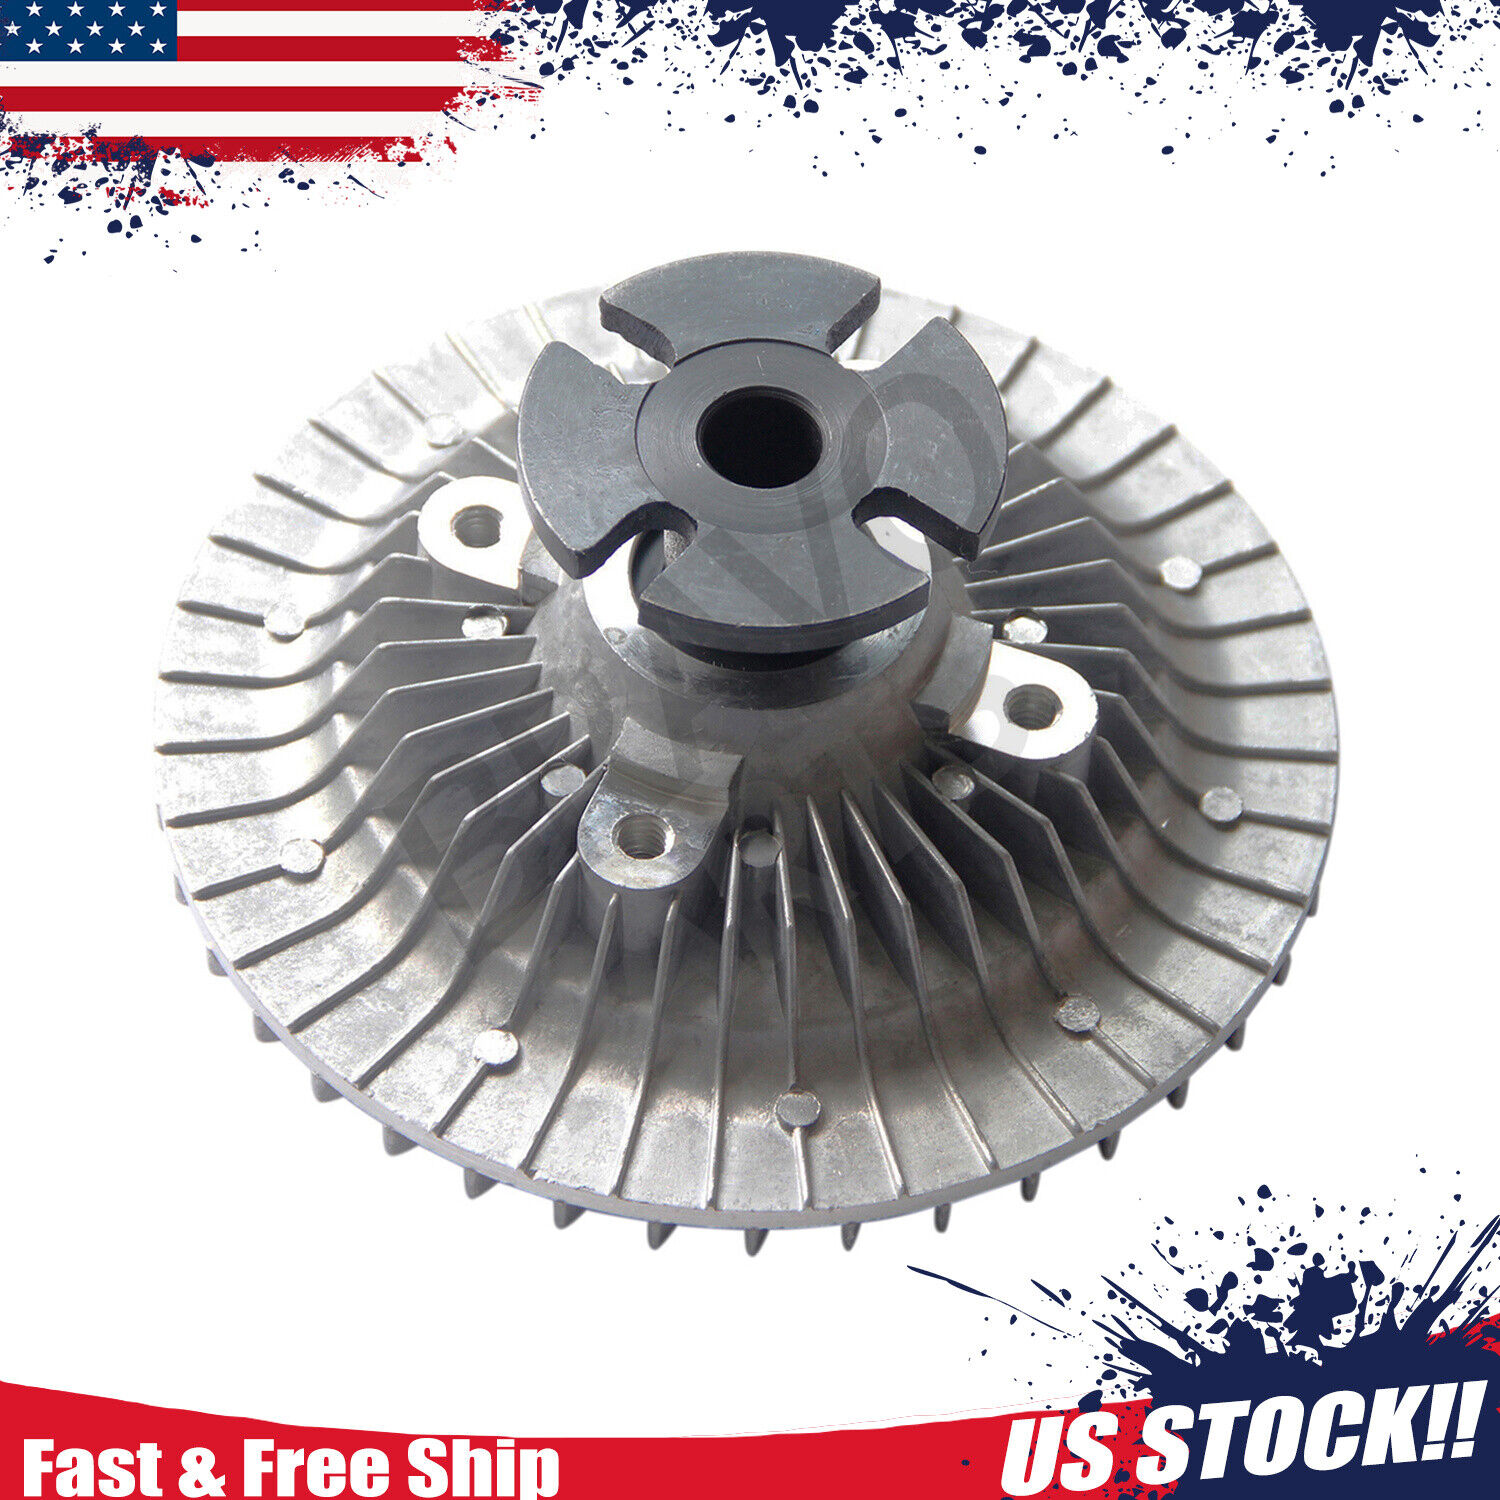 New Cooling Fan Clutch fits 1978 1979 1980 American Motors Concord Eagle Buick